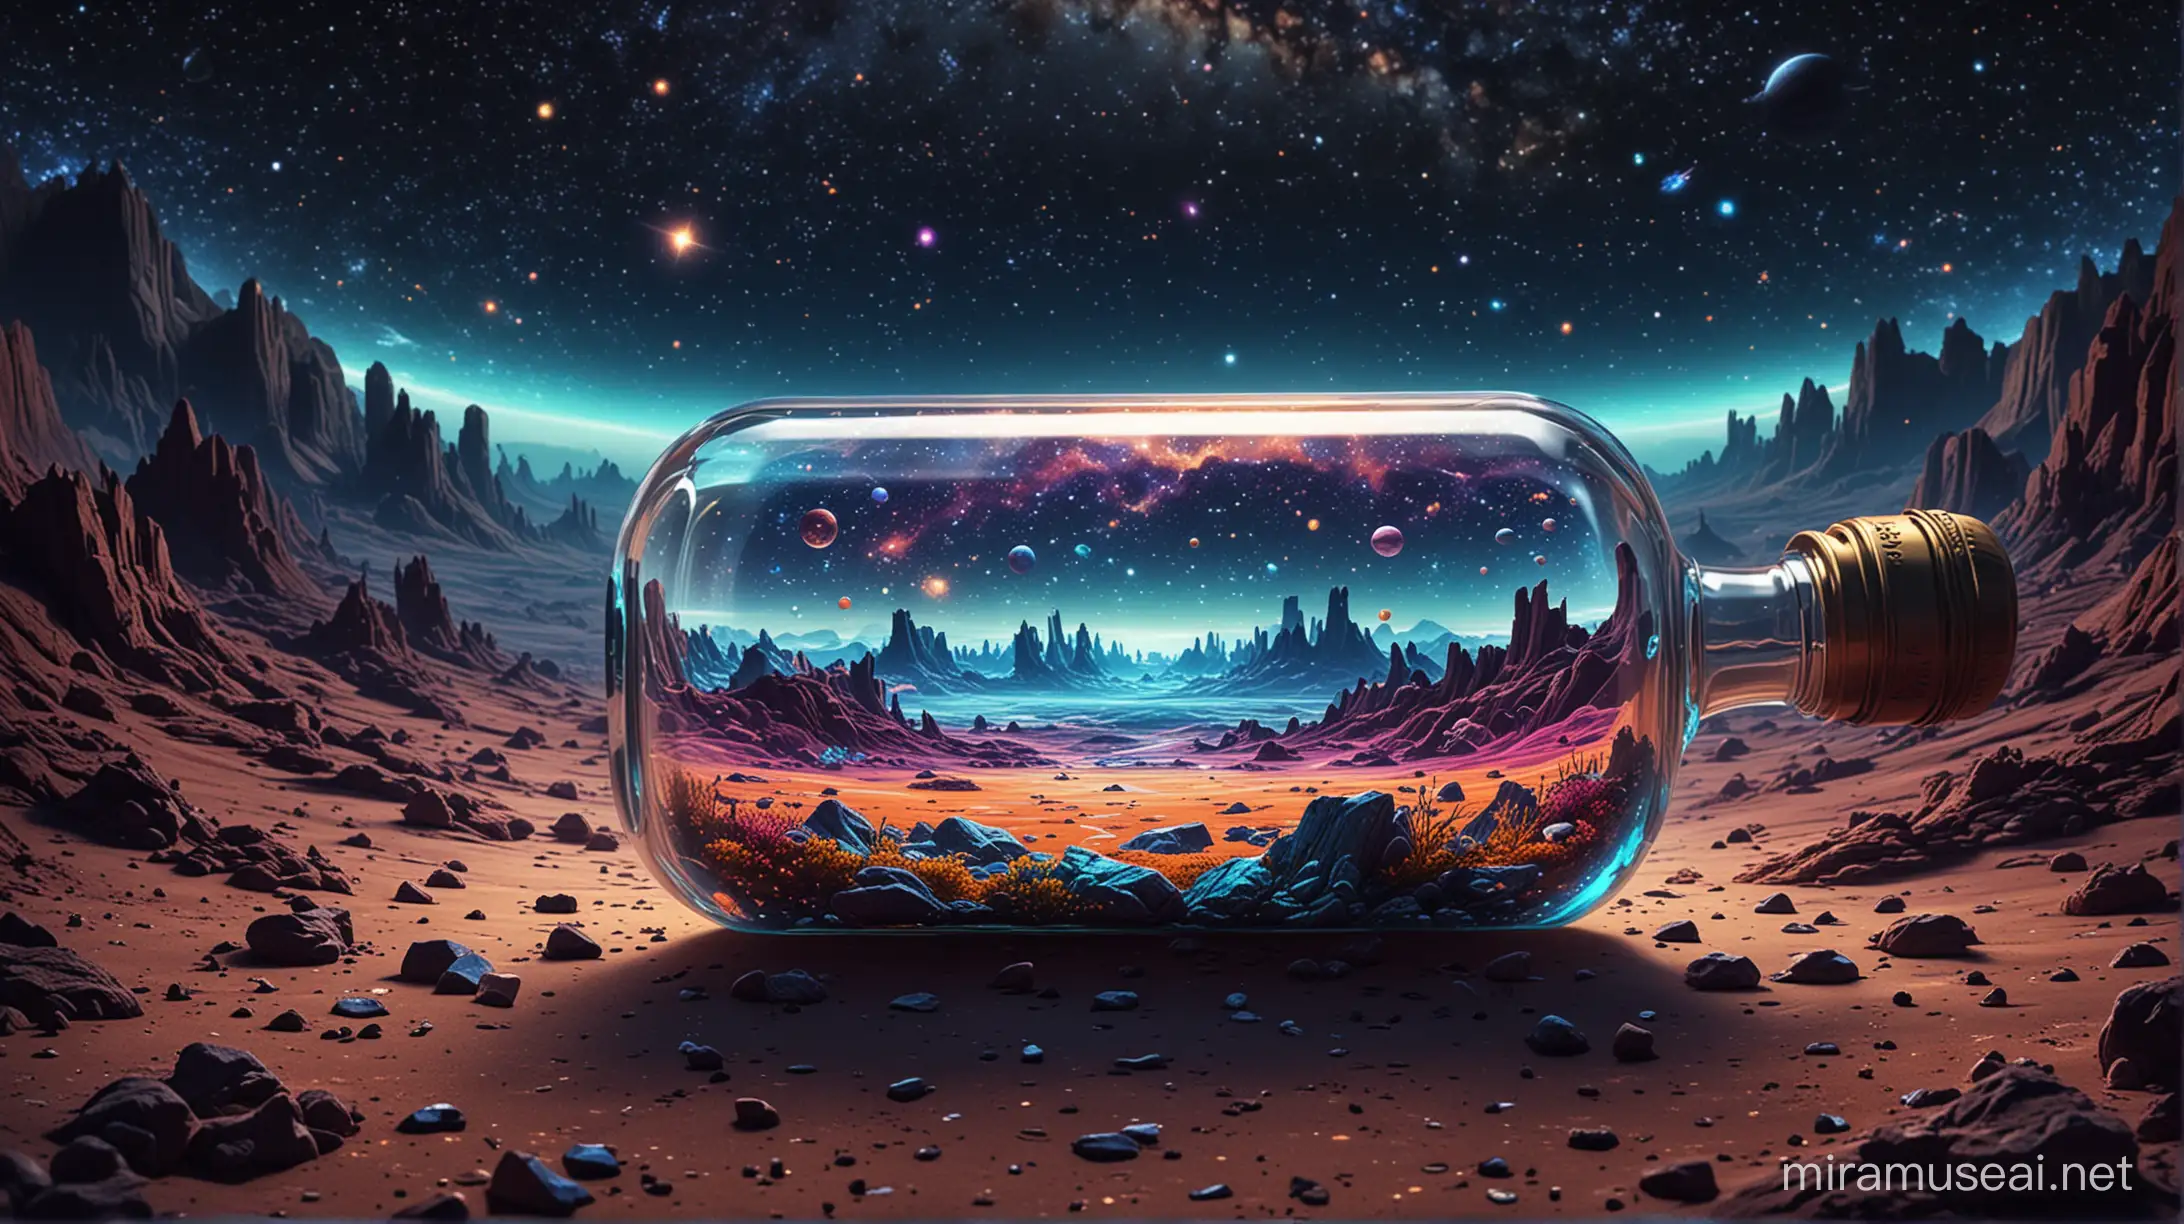 Dive into the depths of your imagination and bring to life a diverse and creative space illustration. Imagine an old glass bottle floating in the vastness of space, surrounded by a vibrant and detailed neon landscape. The background should be filled with stars and planets, adding a touch of wonder and mystery to the image. peaceful, symmetrical, hyper-detailed, sharp, high resolution, high quality, 32K, Ultra realisti, HD, super detailed, line art, abstract style